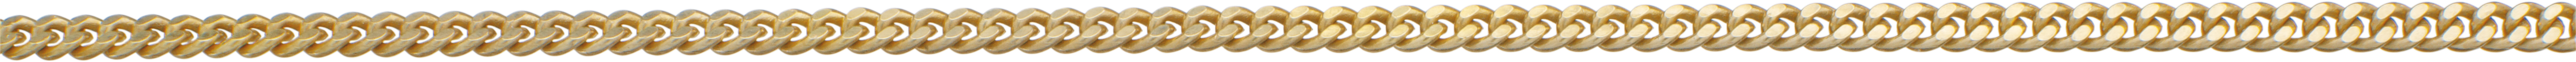 Flat curb chain flat gold 333/-Gg 2.00mm, wire thickness 0.60mm